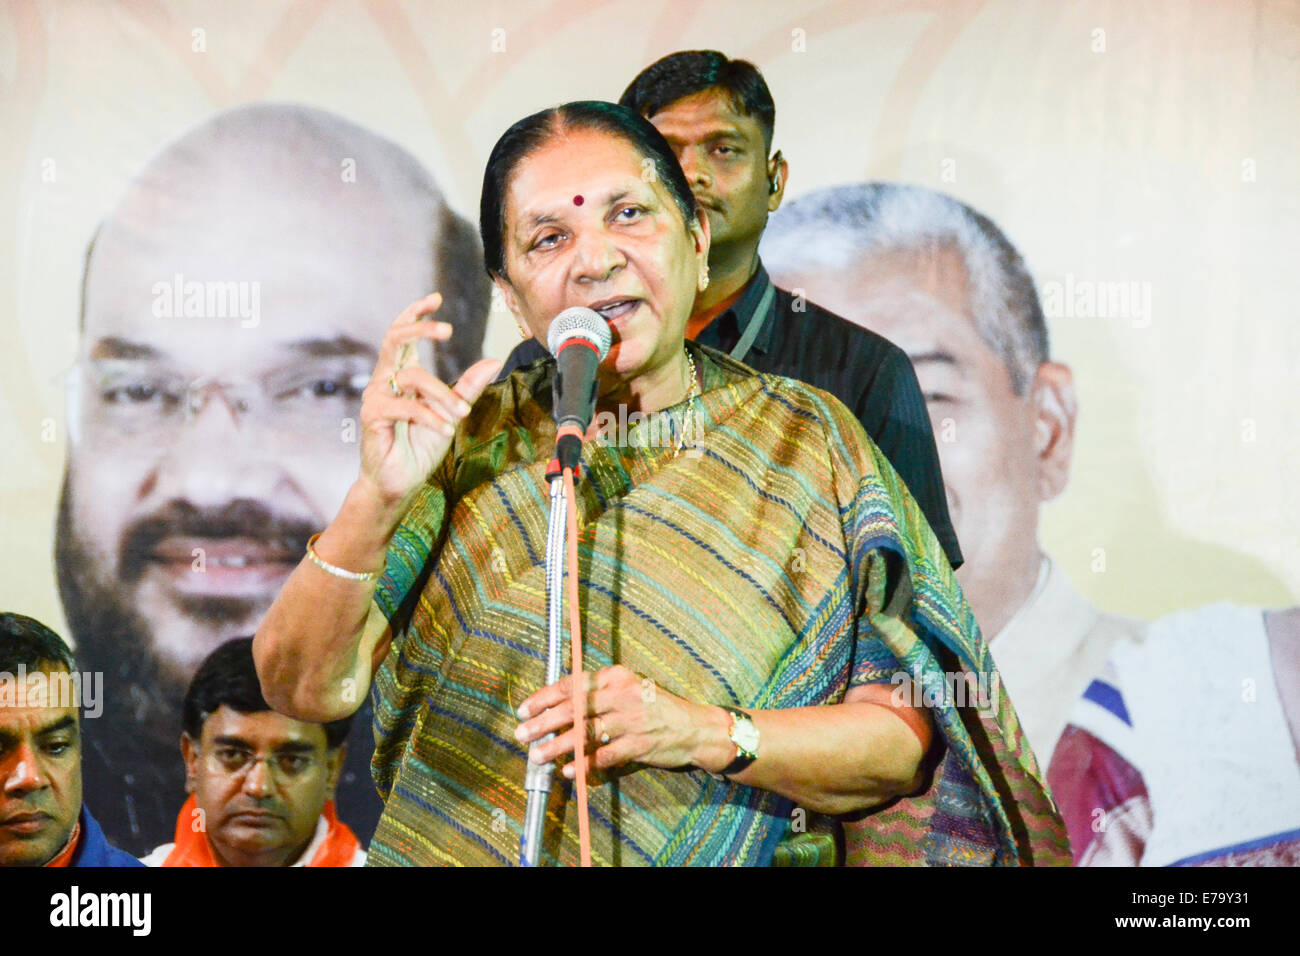 Ahmedabad, Gujarat, India. 10th September, 2014.  Chief Minister Anandi Patel says for next 50 years, no one is capable to fit in PM Shri Narendra Modi’s shoes,during event  in Maninagar,Ahmedabad, India. Credit:  Nisarg Lakhmani/Alamy Live News Stock Photo